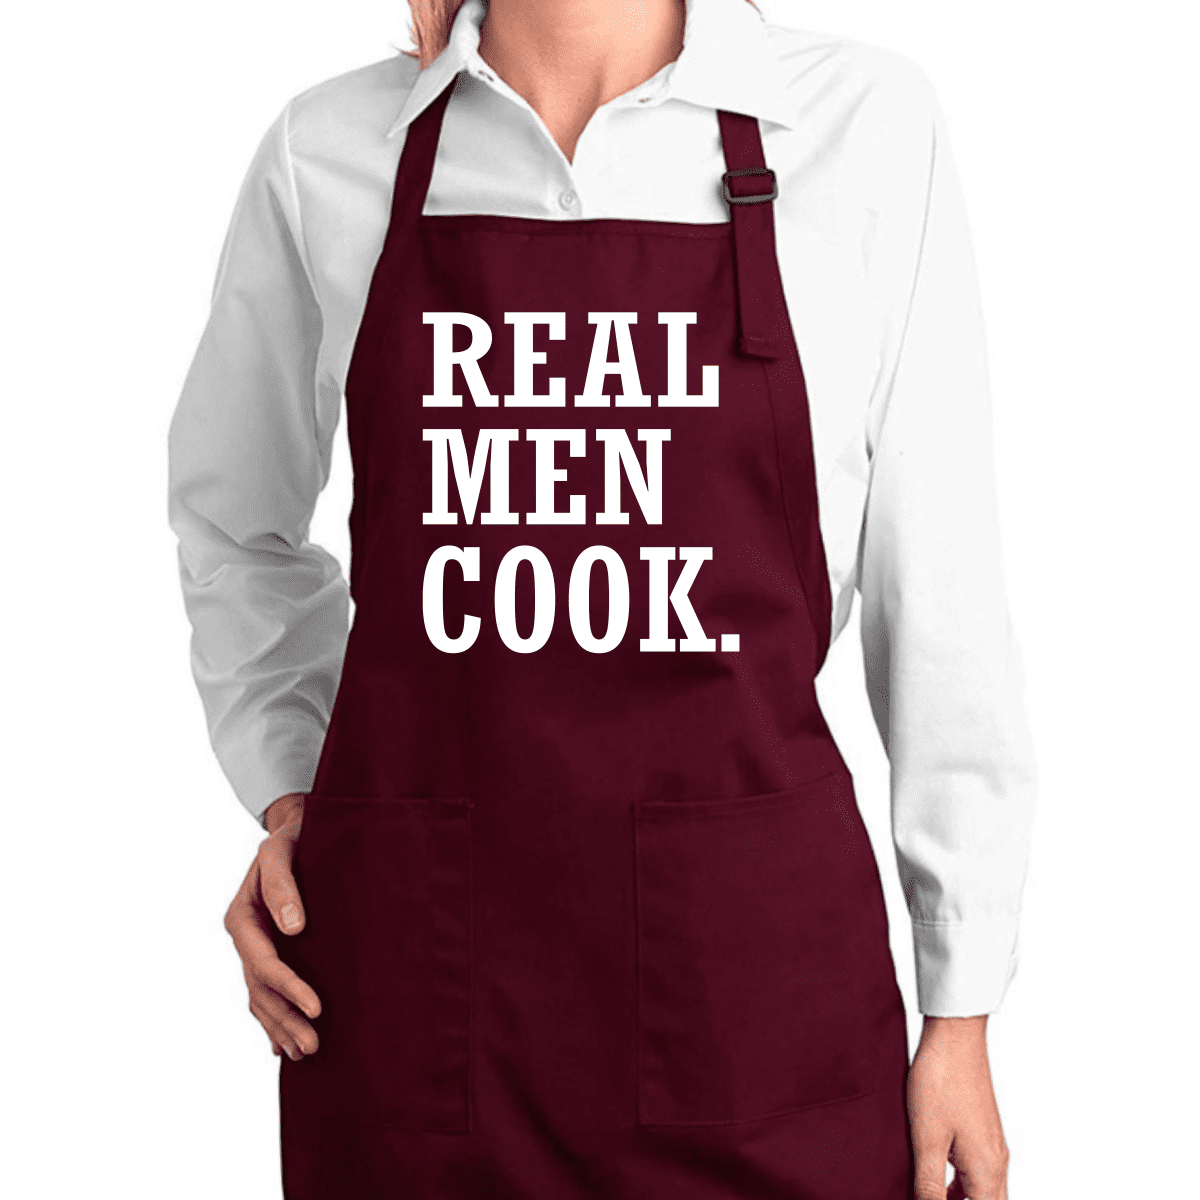 Man Cooking Kitchen Apron Novelty Proceed with Caution Apron and Hat gift Set